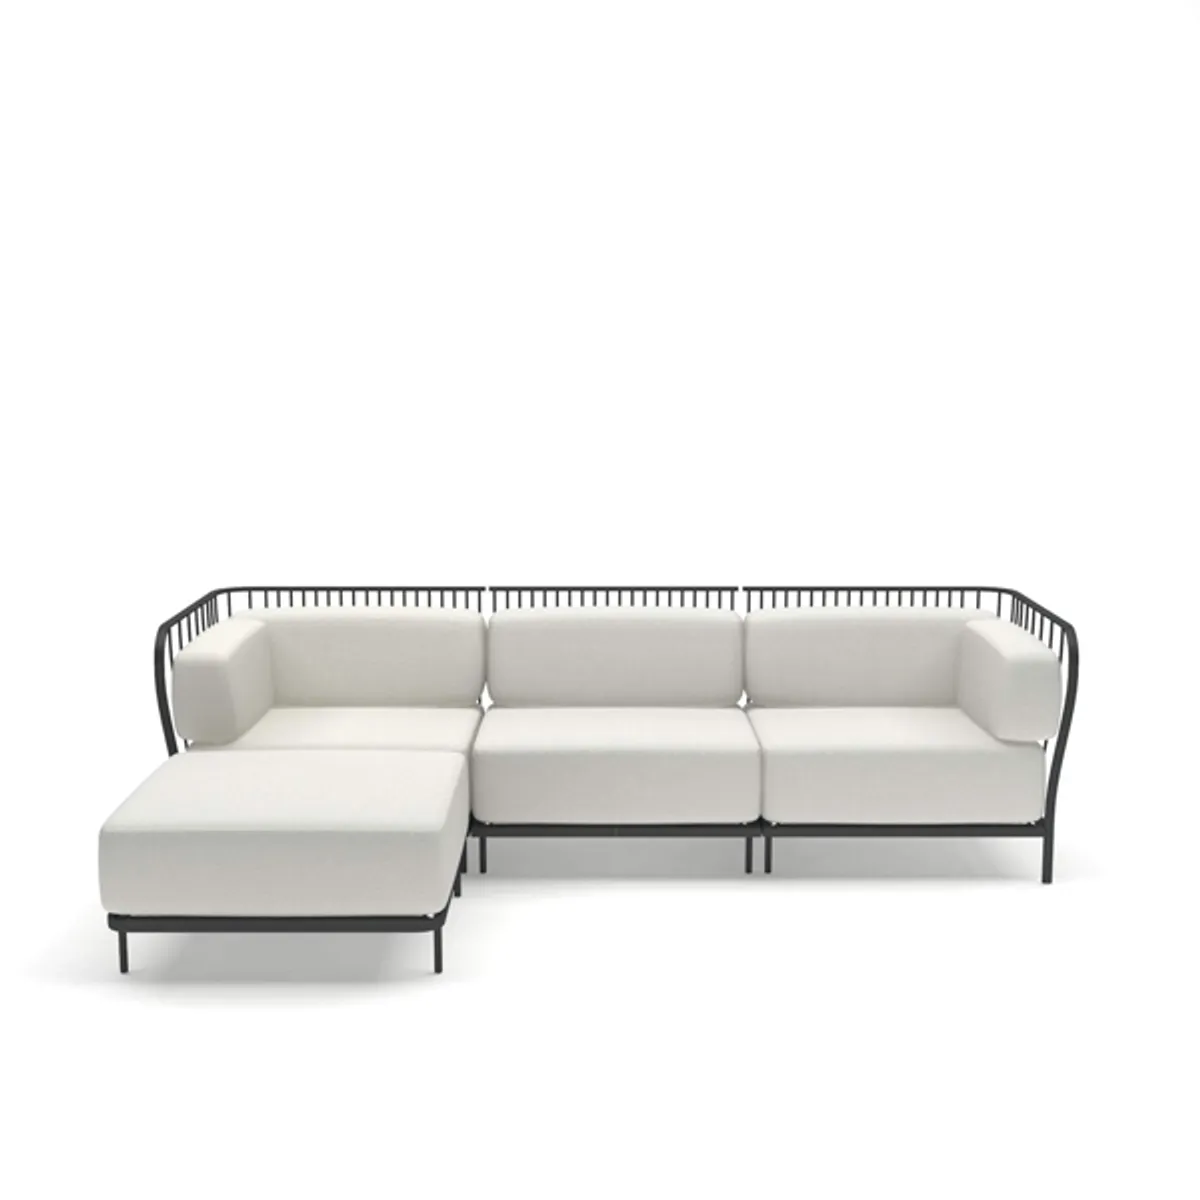 Cannole modular sofa Inside Out Contracts3